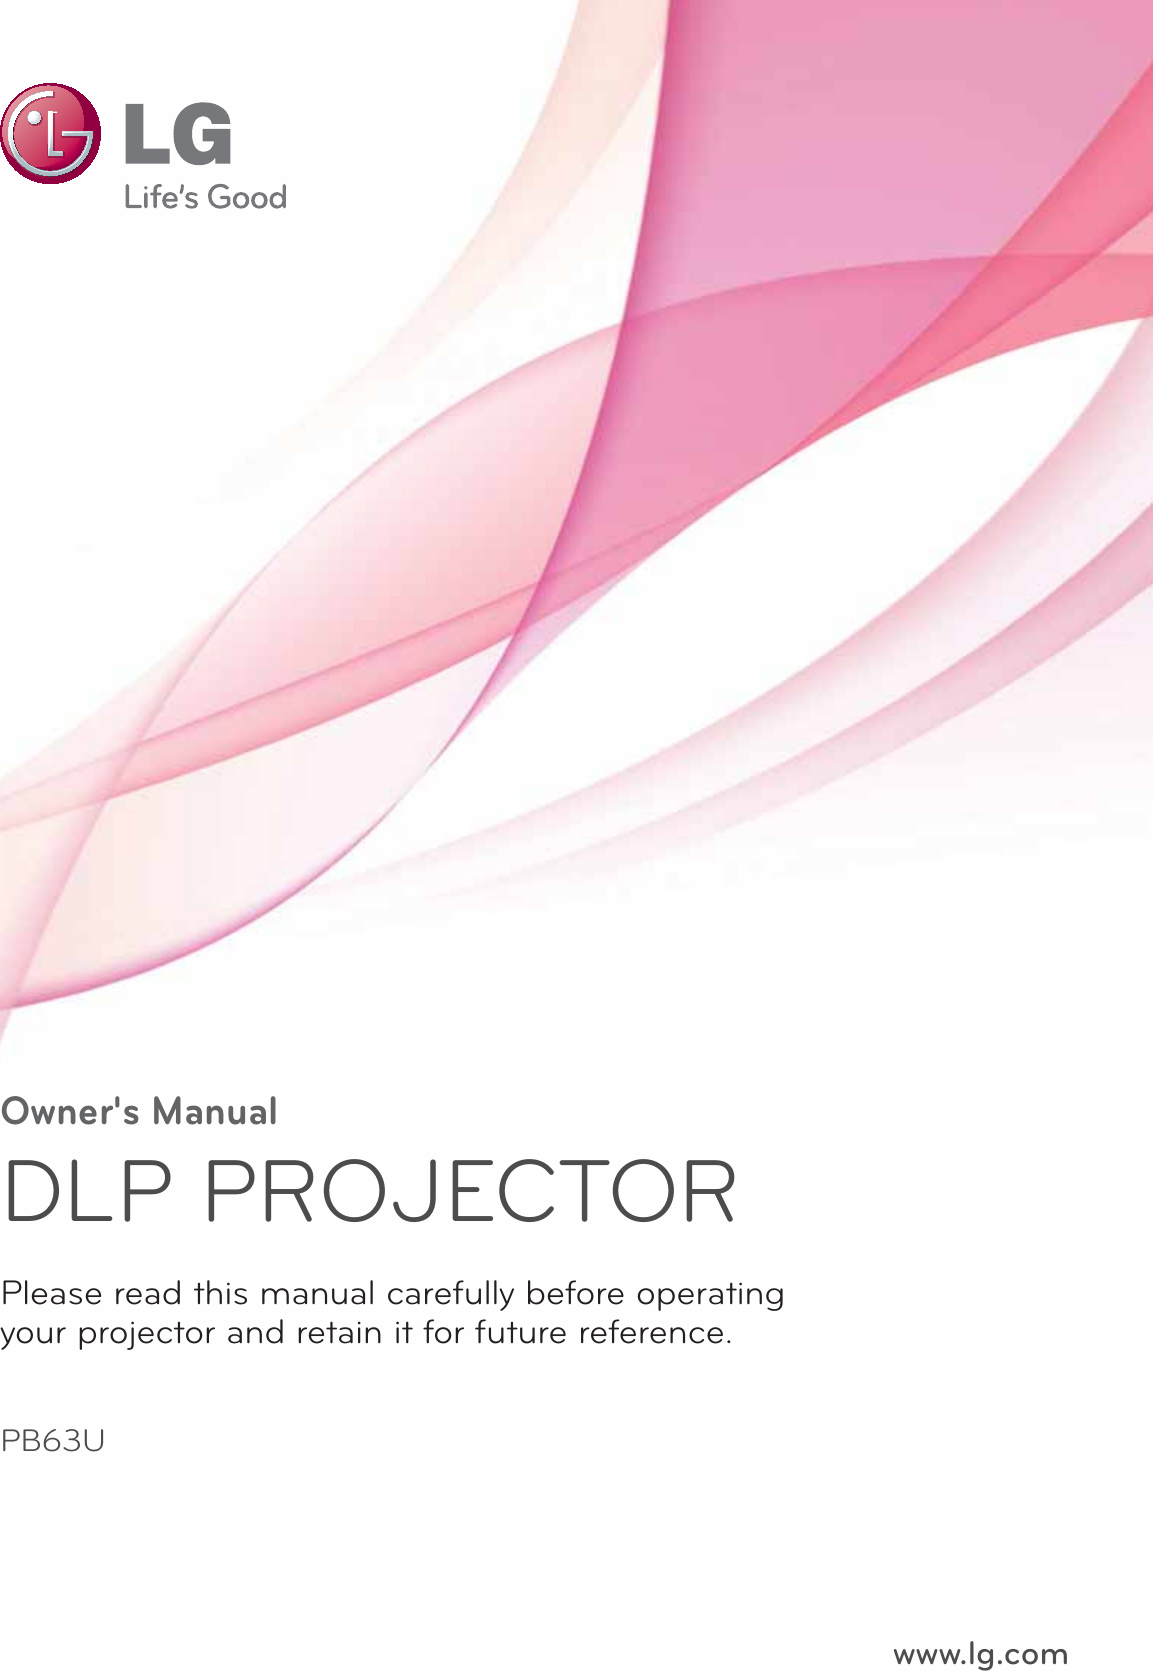 Owner&apos;s ManualDLP PROJECTORPB63UPlease read this manual carefully before operatingyour projector and retain it for future reference.www.lg.com